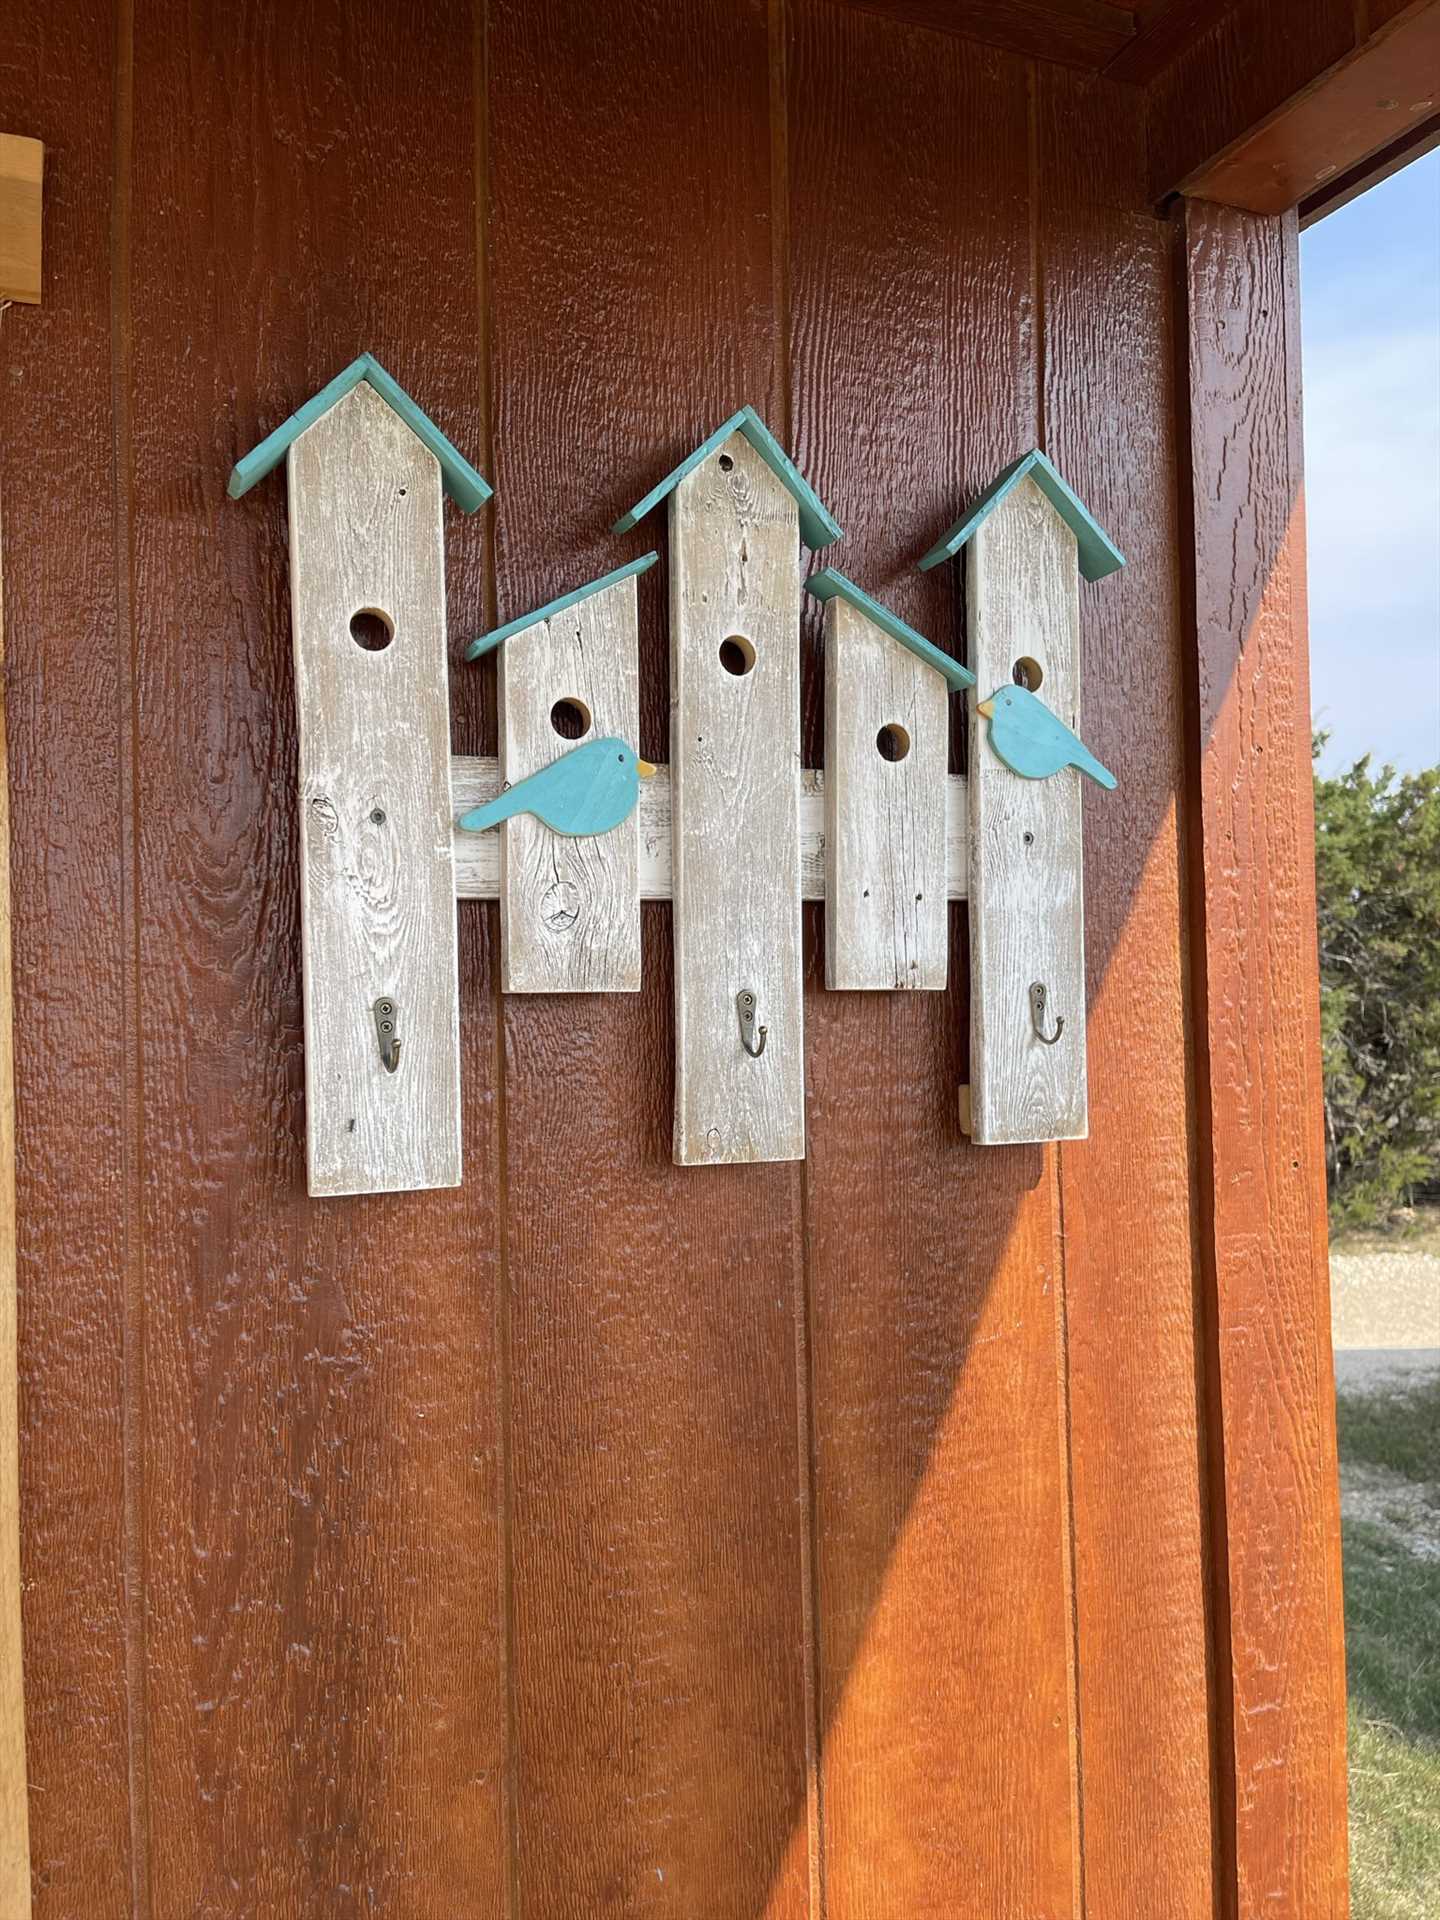                                                 The birdhouse motif by the door welcomes you home to your private nest in the Hill Country!